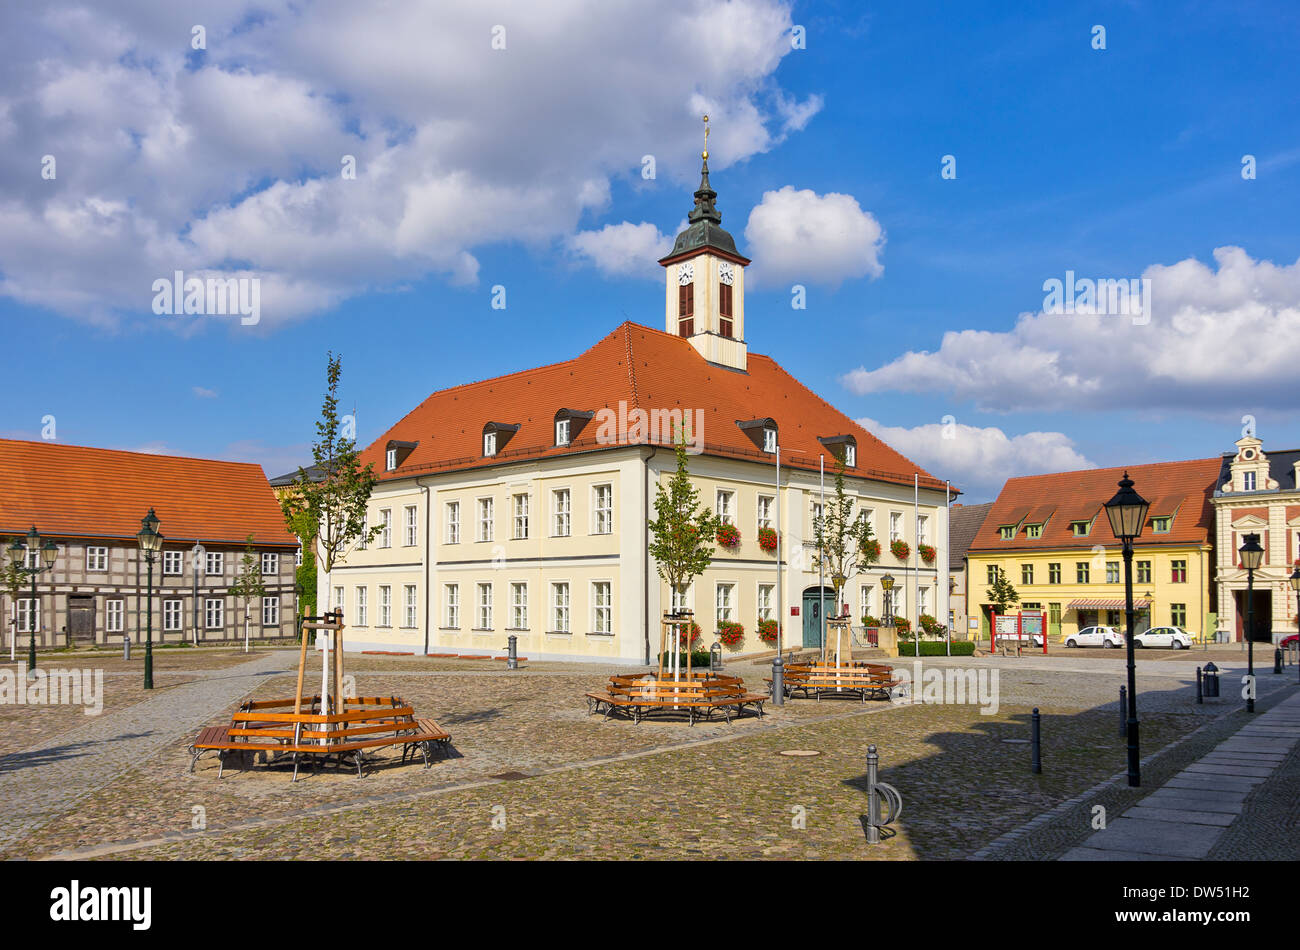 Town Hall And Market Square, Angermunde, Germany. Stock Photo